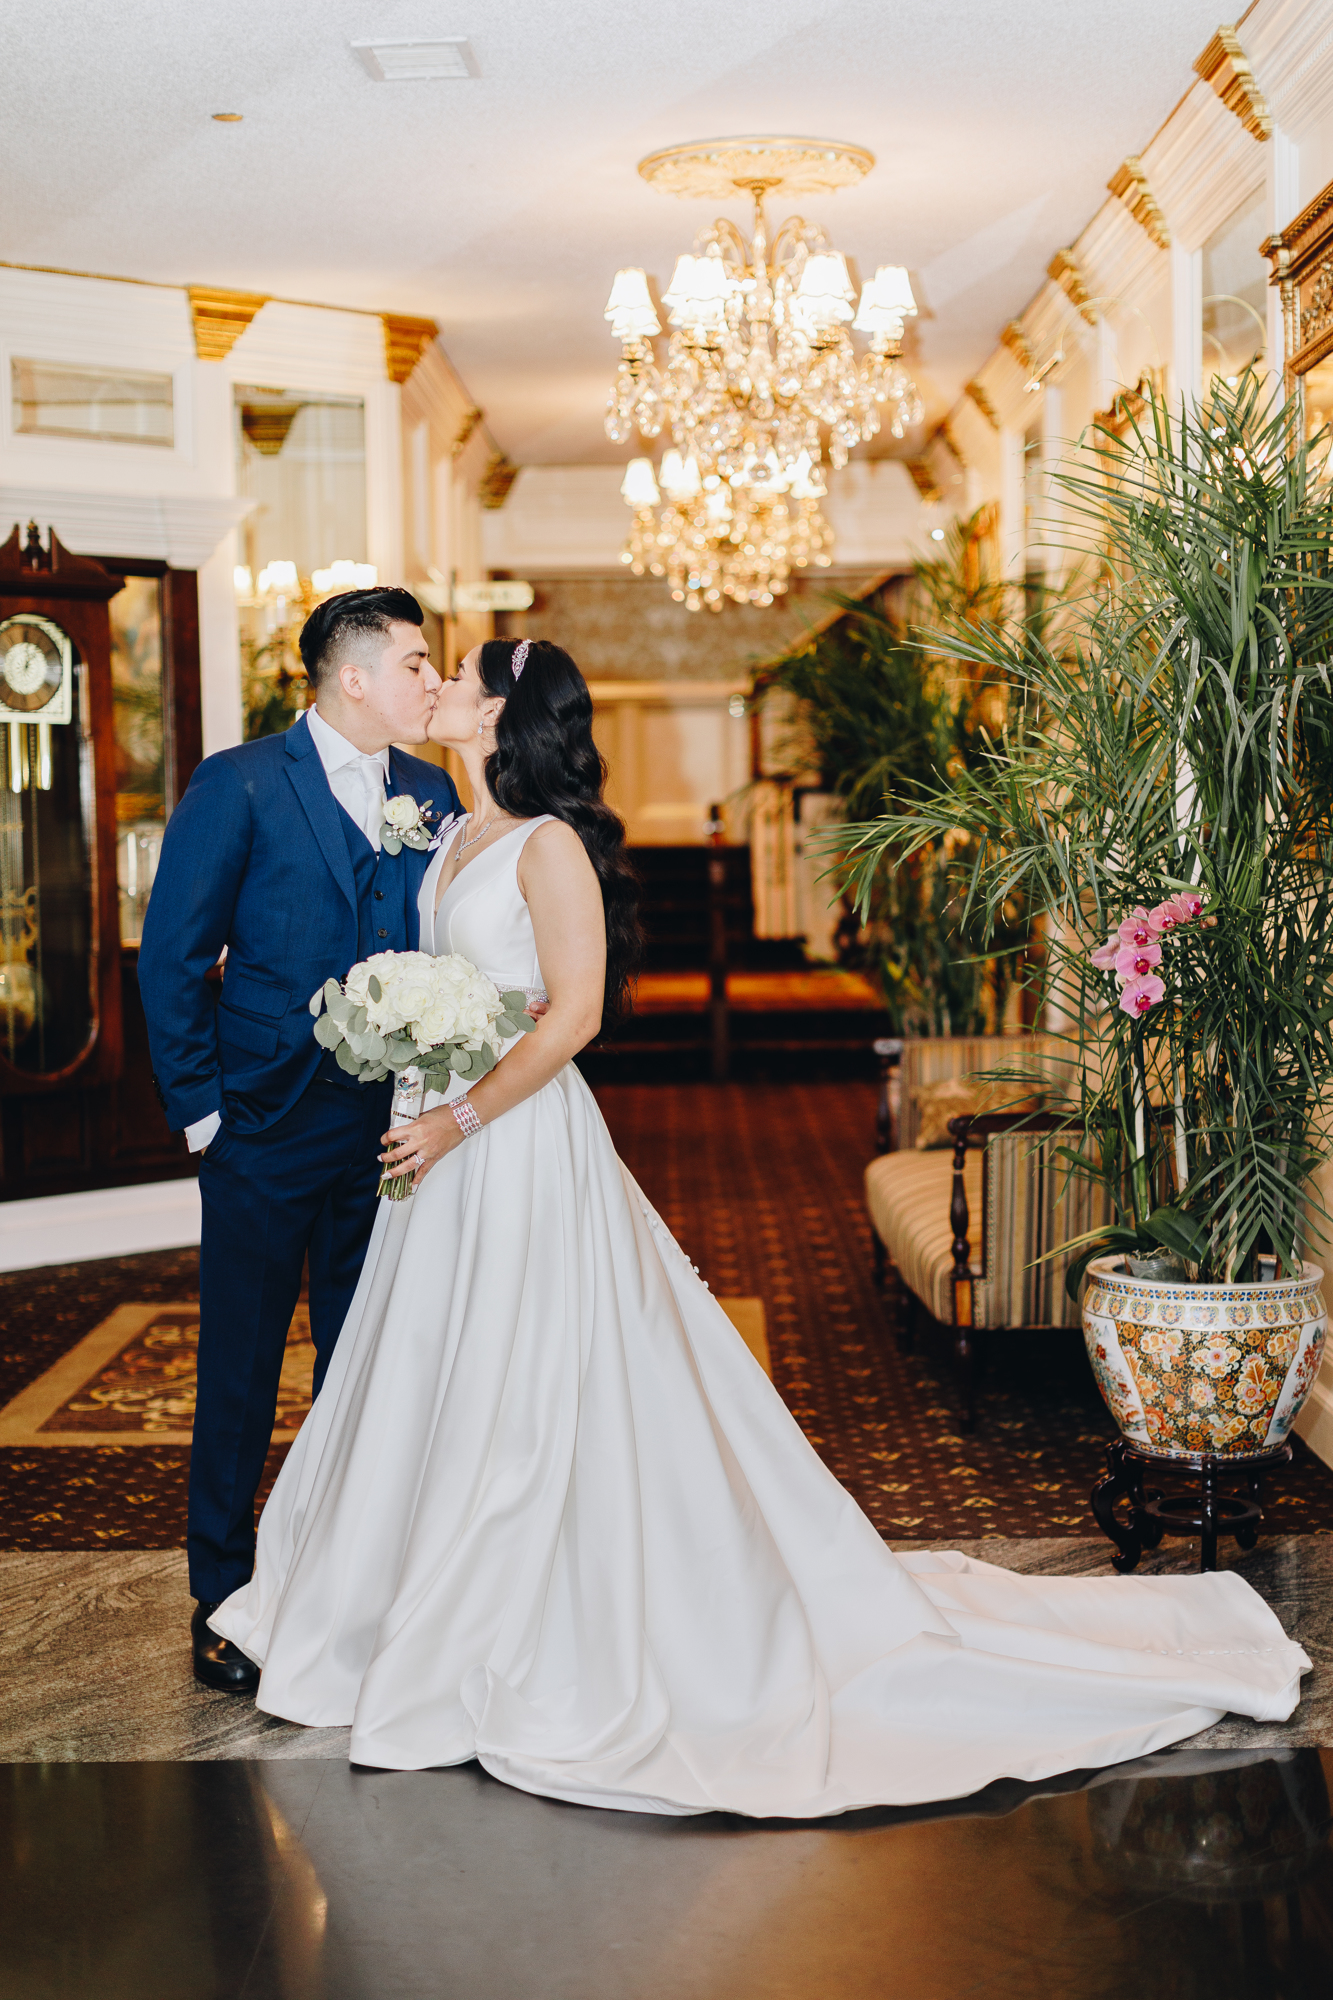 Gorgeous wedding photos at the Brownstone in NJ